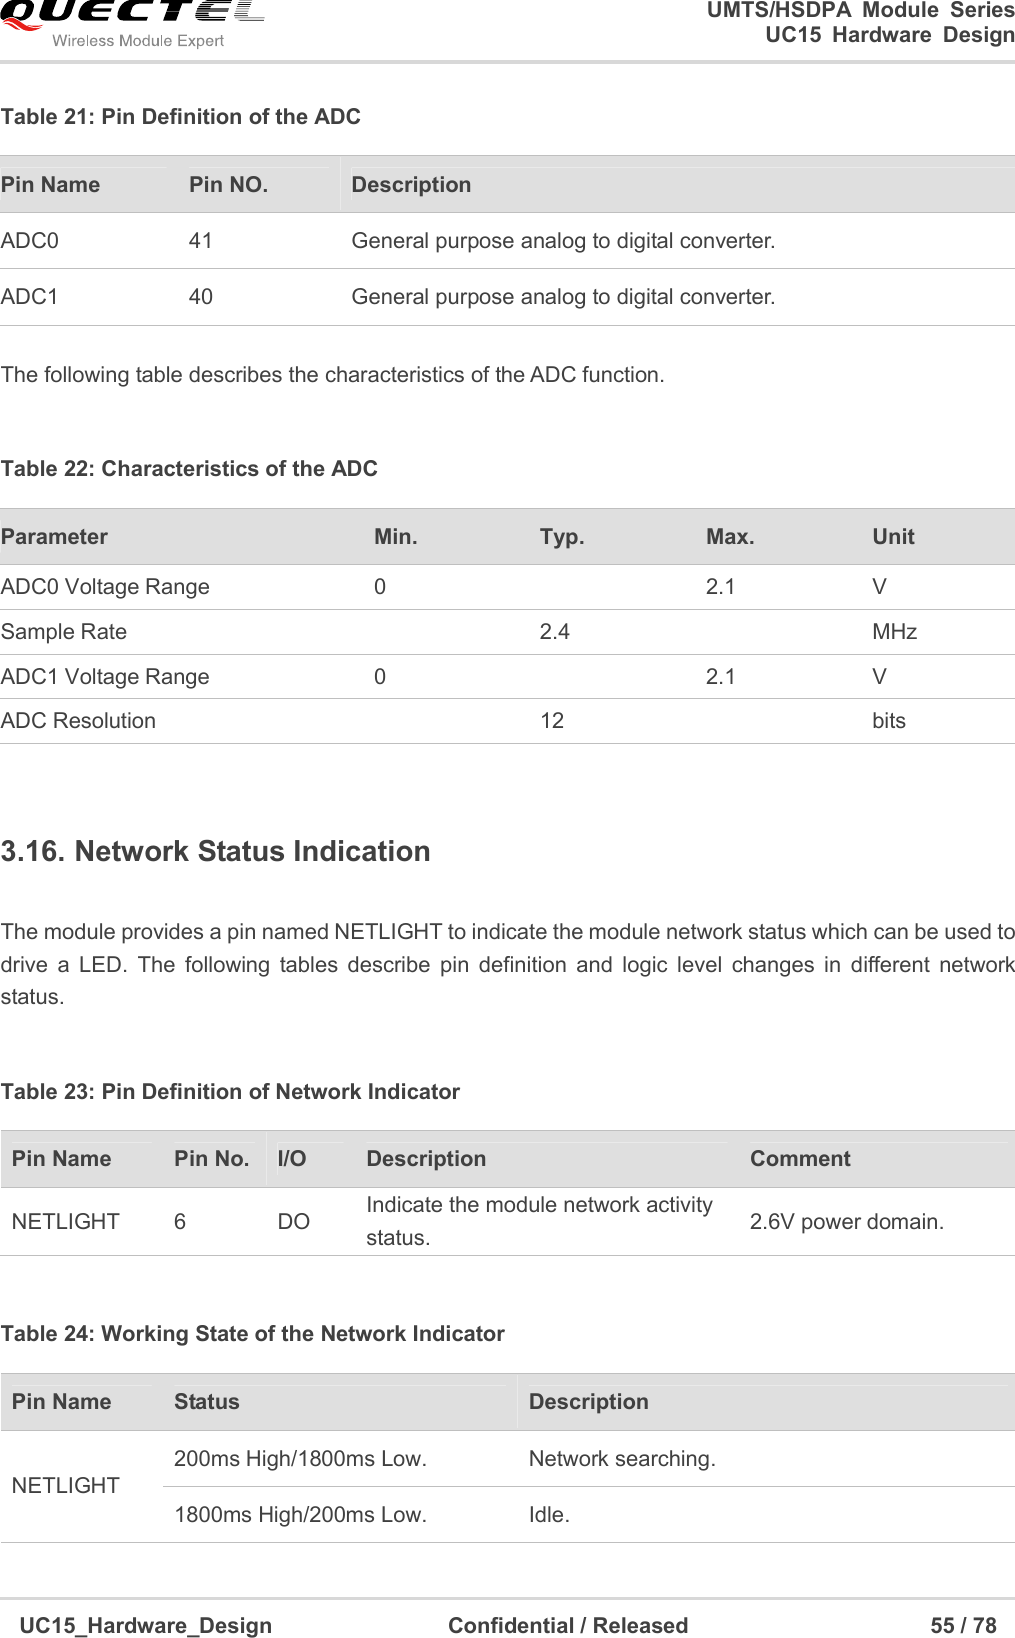                                                                        UMTS/HSDPA  Module  Series                                                                 UC15 Hardware Design  UC15_Hardware_Design                                Confidential / Released                                            55 / 78    Table 21: Pin Definition of the ADC    The following table describes the characteristics of the ADC function.  Table 22: Characteristics of the ADC  3.16. Network Status Indication  The module provides a pin named NETLIGHT to indicate the module network status which can be used to drive  a  LED.  The  following  tables  describe  pin  definition  and  logic  level  changes  in  different  network status.    Table 23: Pin Definition of Network Indicator  Table 24: Working State of the Network Indicator Pin Name  Pin NO.  Description ADC0  41  General purpose analog to digital converter. ADC1  40  General purpose analog to digital converter. Parameter  Min.  Typ.  Max.  Unit ADC0 Voltage Range  0   2.1  V Sample Rate    2.4    MHz ADC1 Voltage Range  0   2.1  V ADC Resolution   12   bits Pin Name    Pin No. I/O  Description    Comment NETLIGHT  6  DO  Indicate the module network activity status.  2.6V power domain. Pin Name  Status  Description NETLIGHT 200ms High/1800ms Low.  Network searching. 1800ms High/200ms Low.  Idle. 